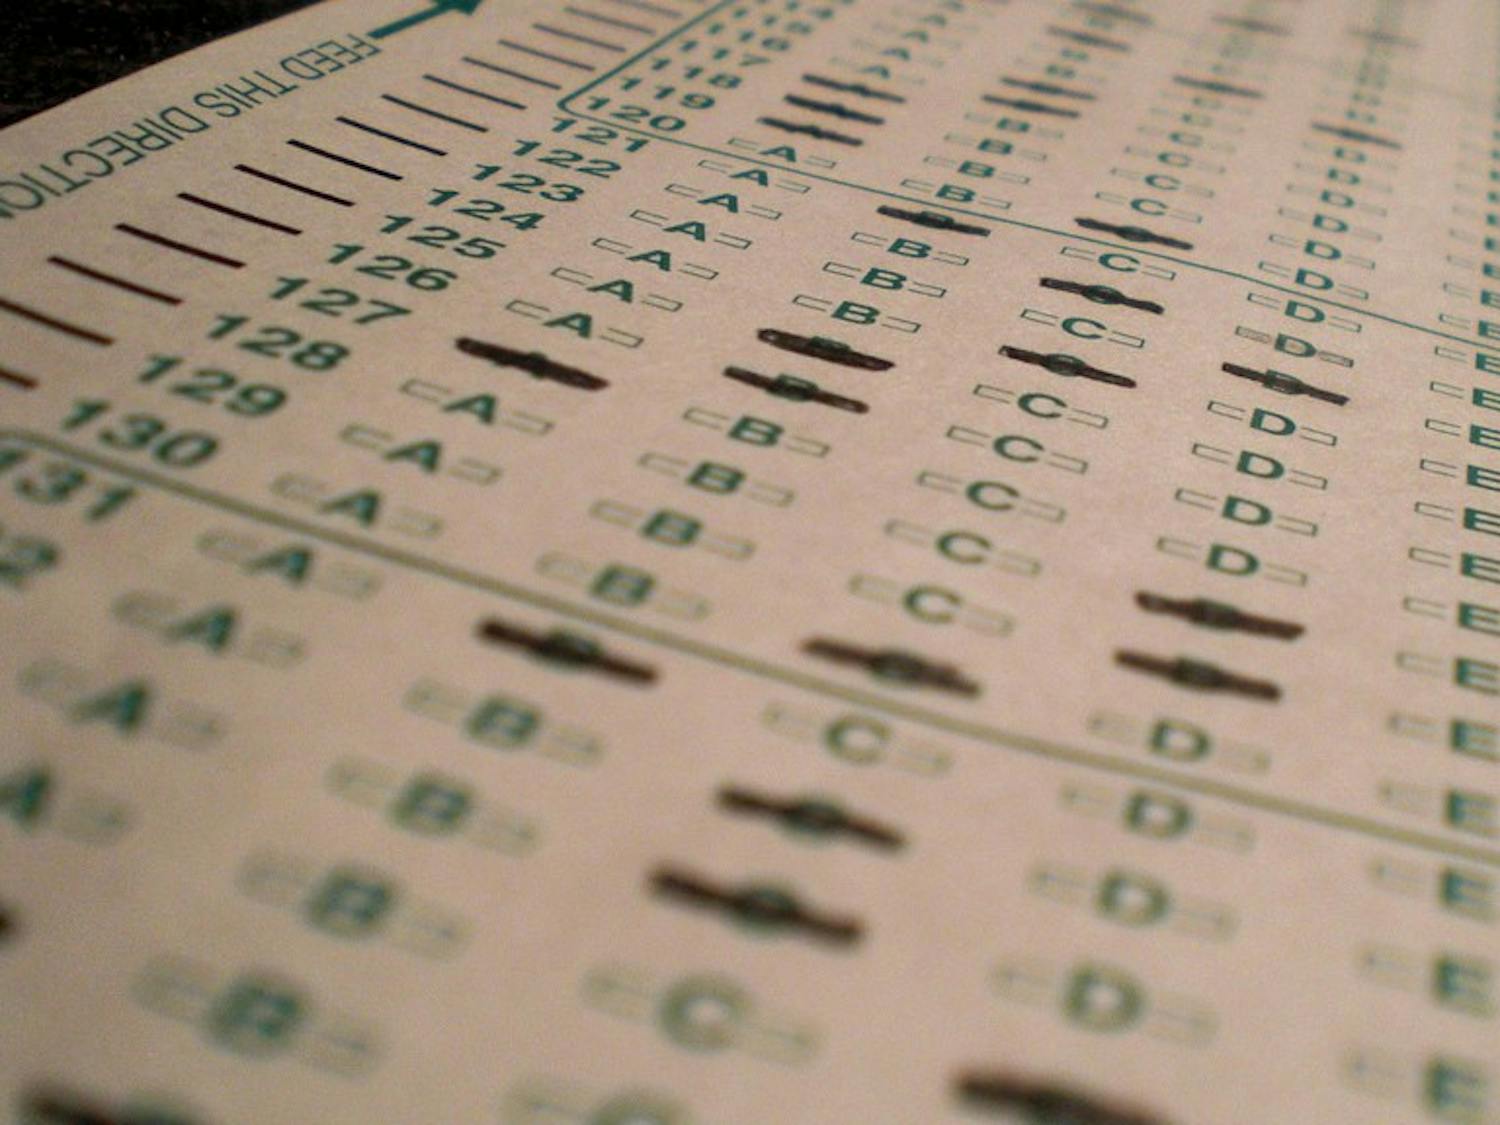 Legislation that would make it easier to opt-out of standardized tests passed the state Assembly this week, marking one of the last acts of the years’ legislative session.